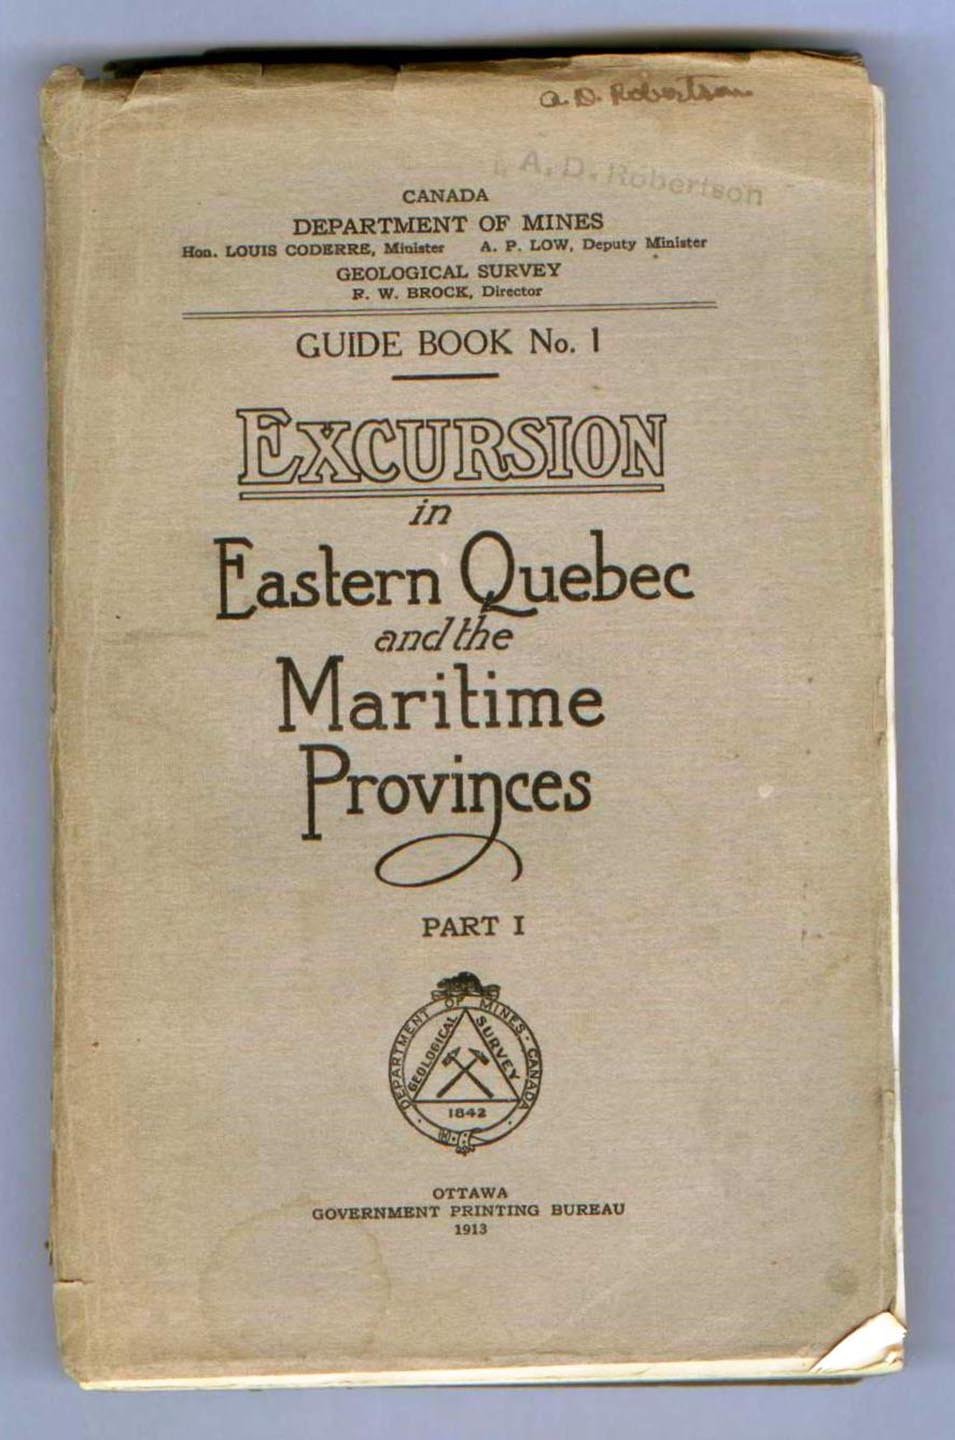 Excursion in Eastern Quebec and the Maritime Provinces Part 1